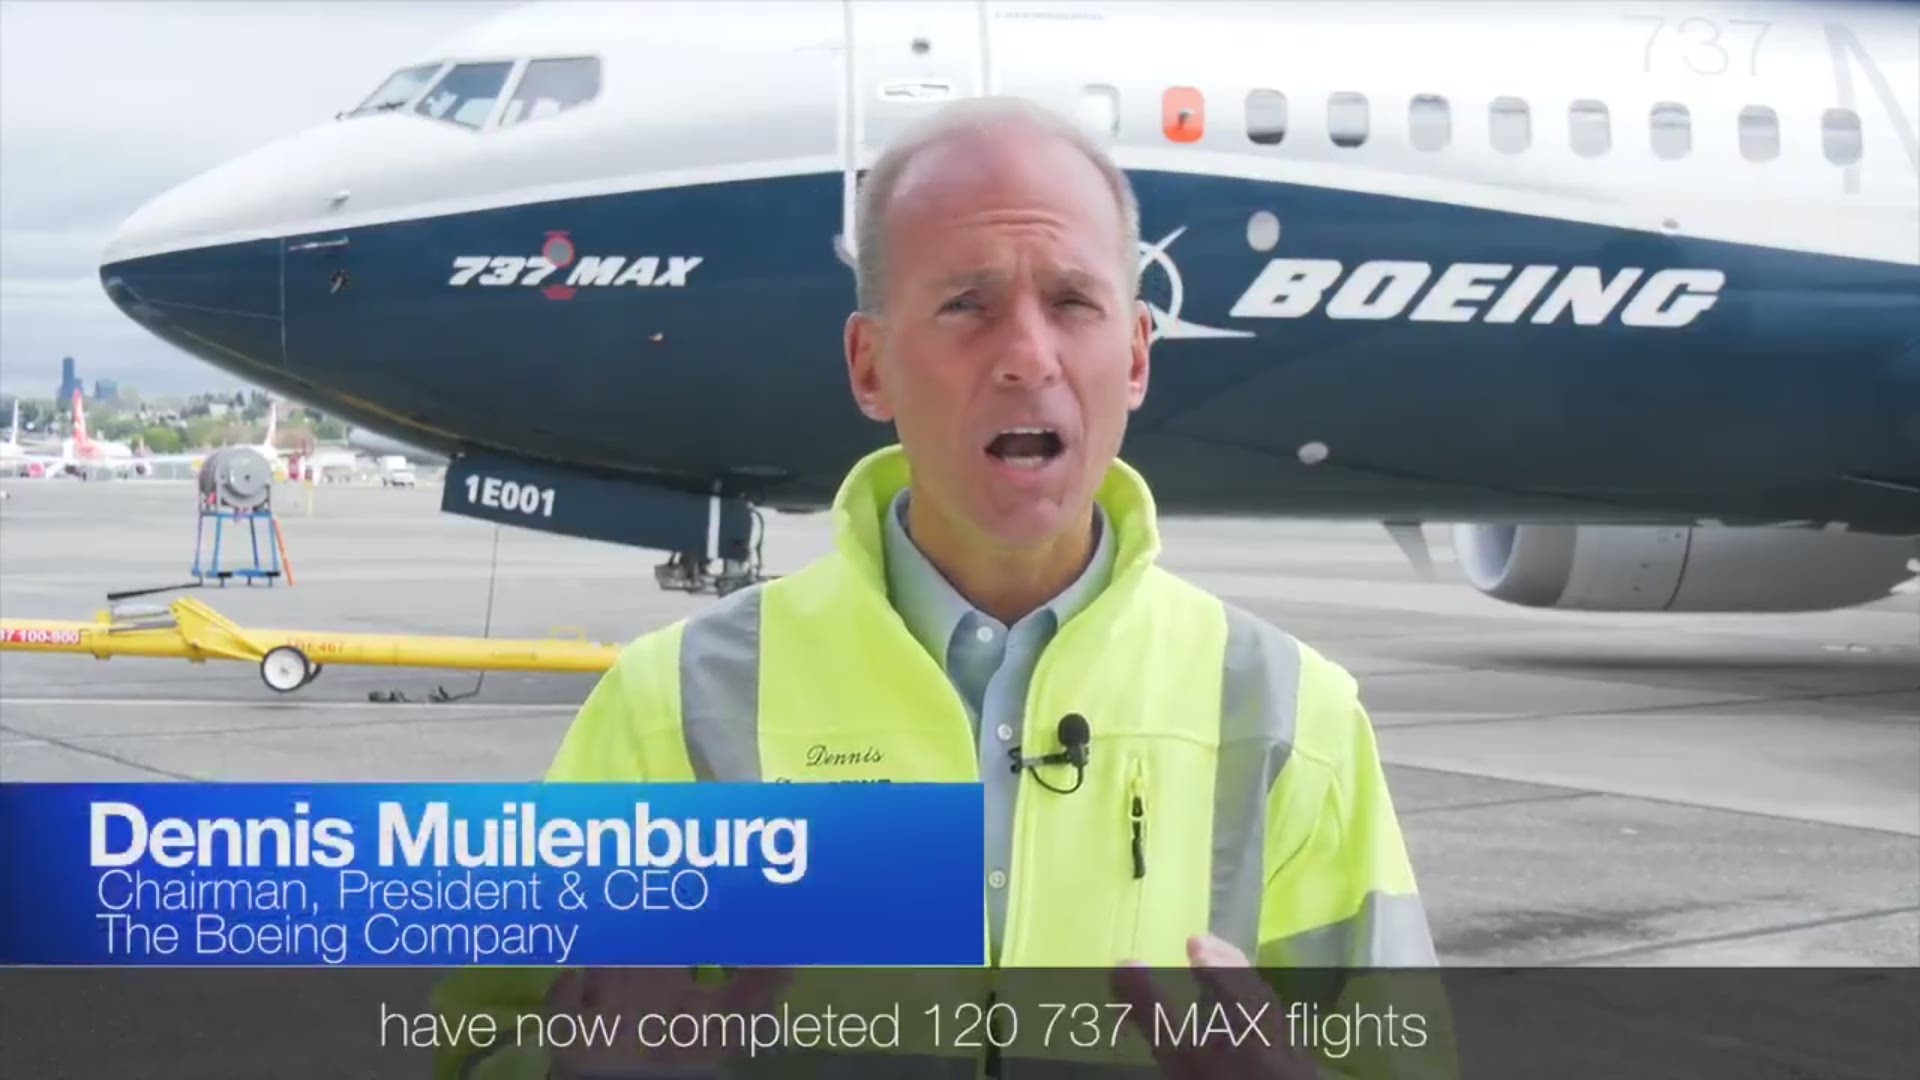 Boeing CEO Dennis Muilenberg took a test flight on a 737 MAX plane over Seattle and released a video statement Wednesday.